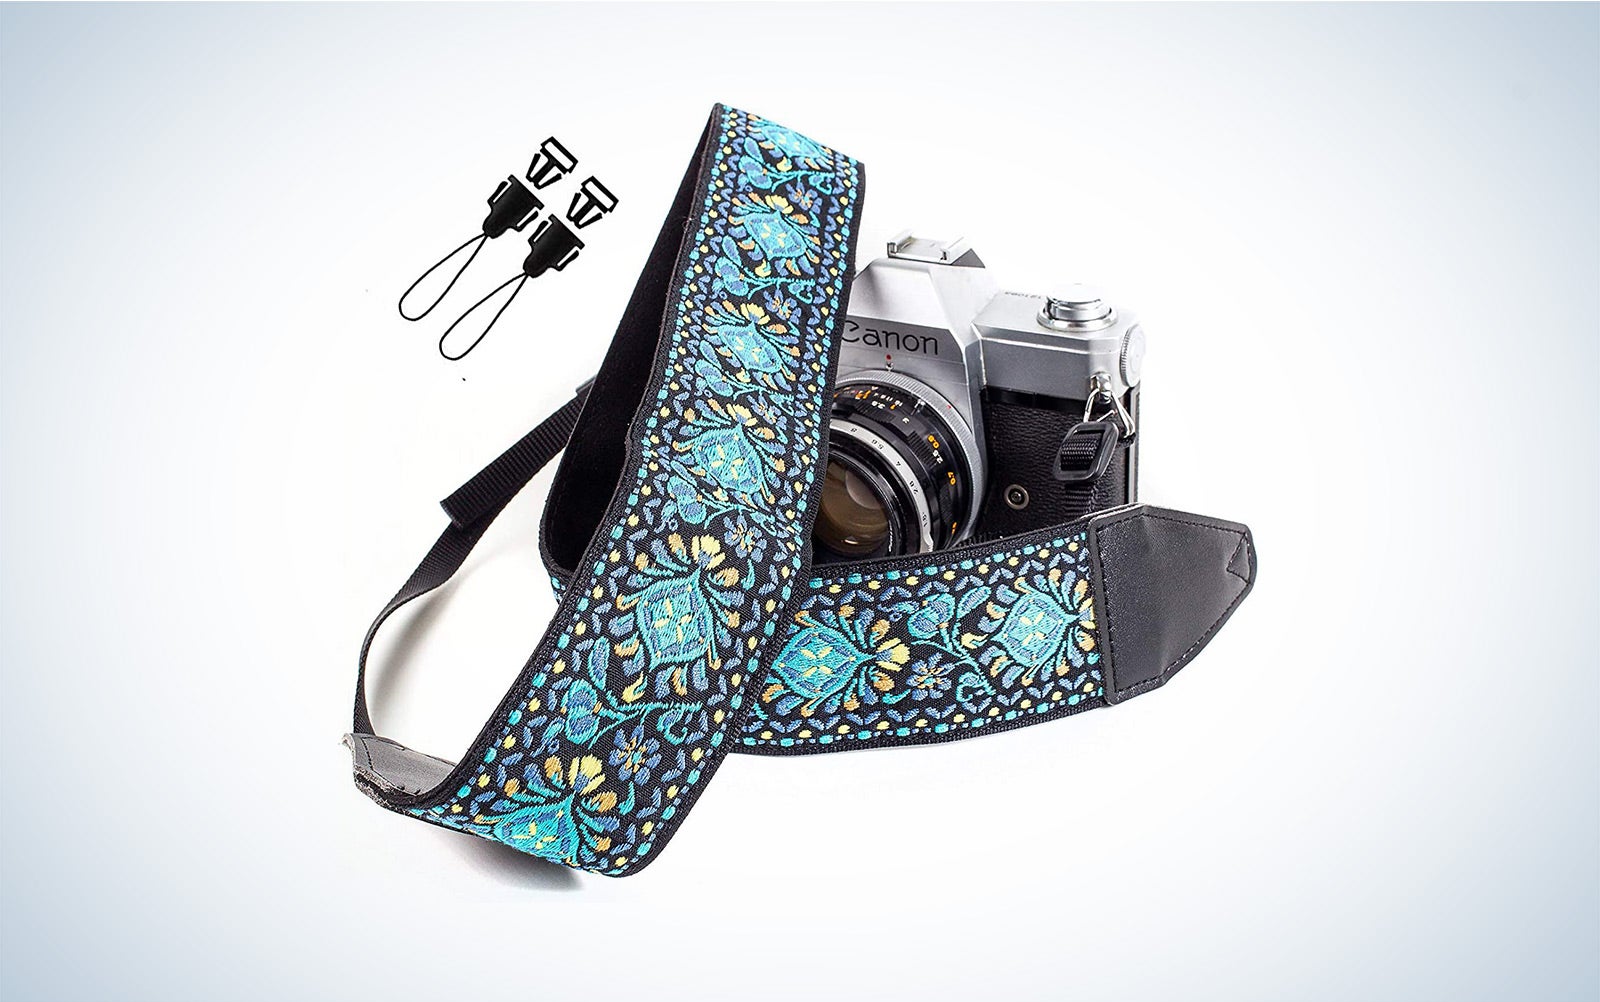 A vintage style camera strap for stylishly holding your film camera.